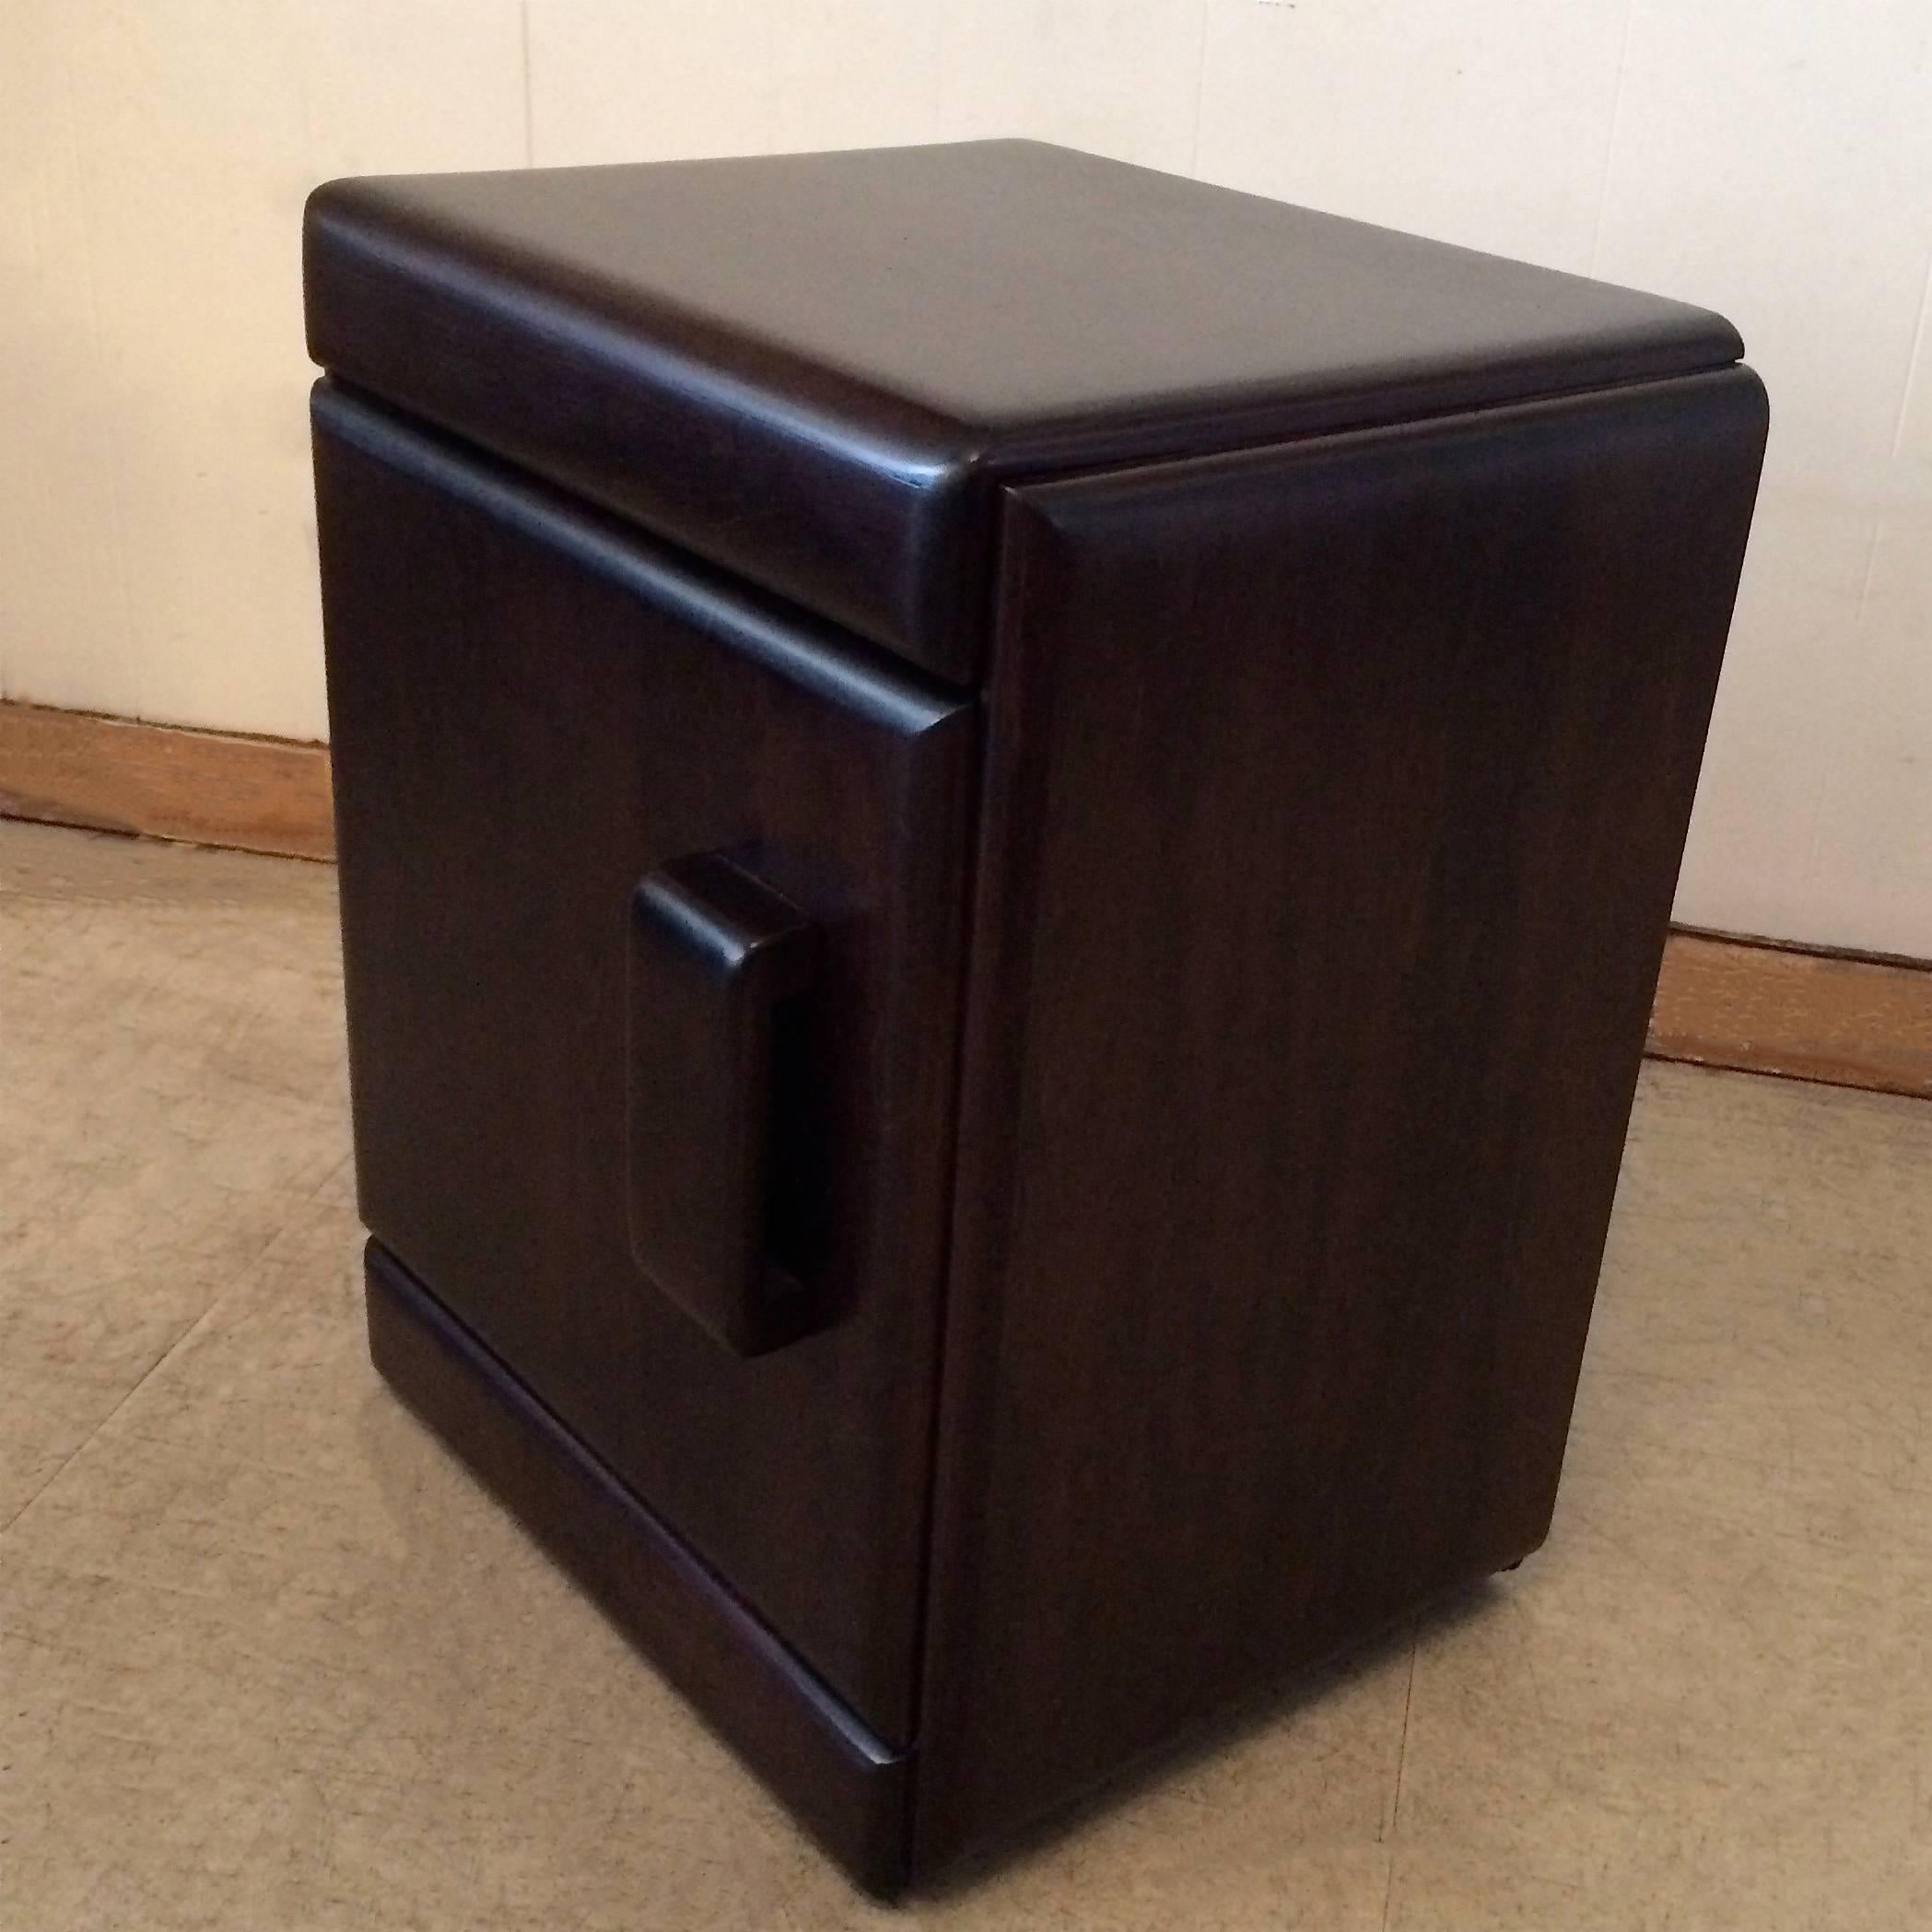 Mid-Century Modern, ebonized maple, nightstand or end table by Russel Wright. Interior includes one adjustable shelf.